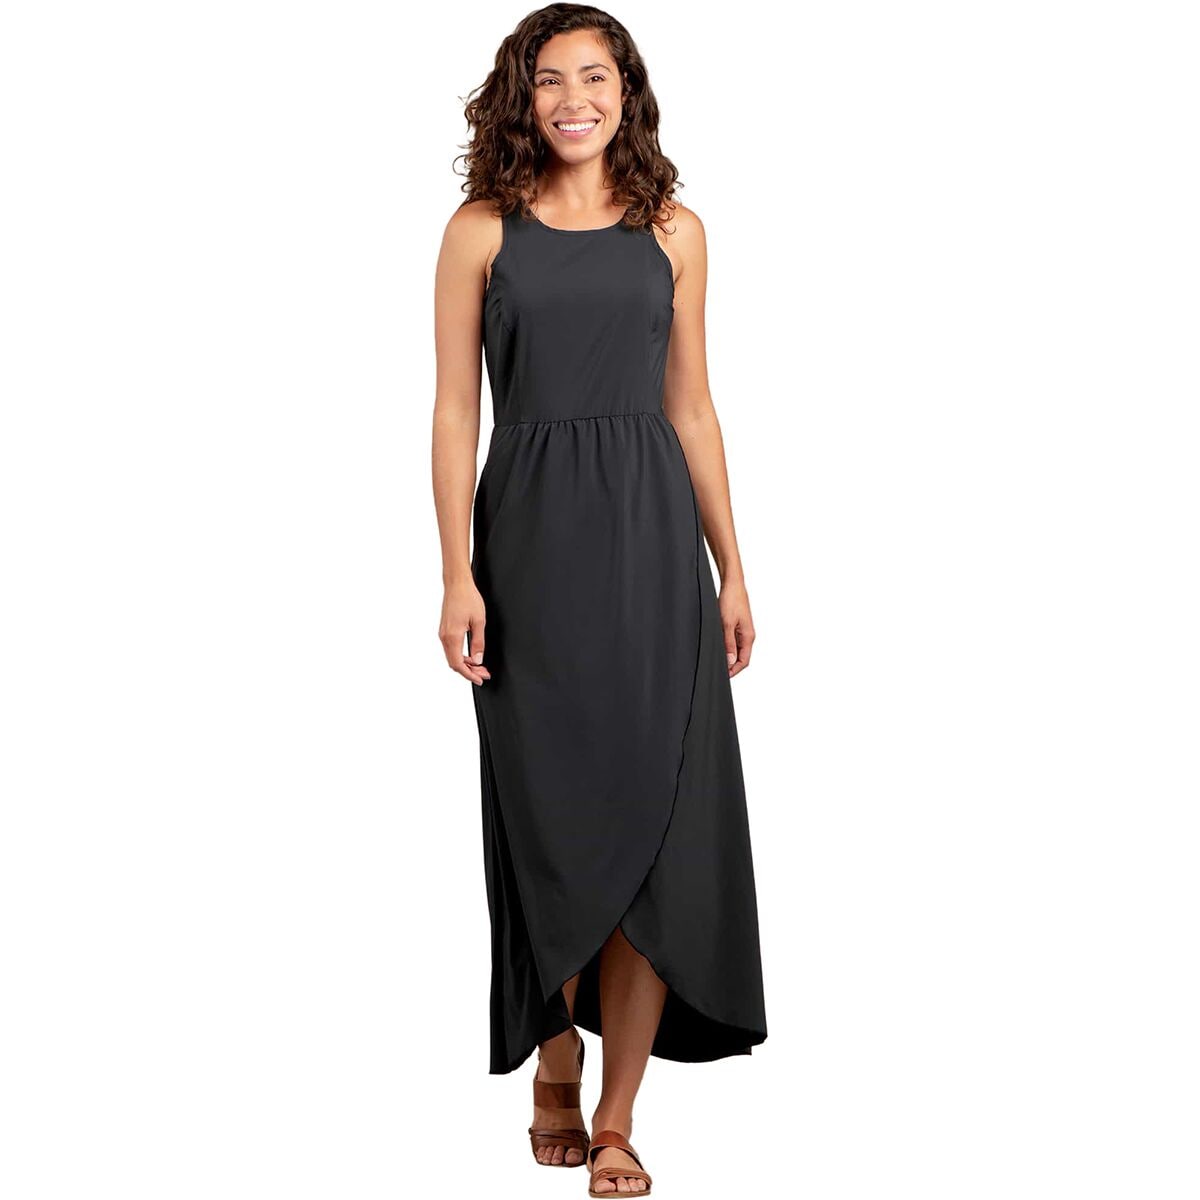 Toad&Co Sunkissed Maxi Dress - Women's Black L